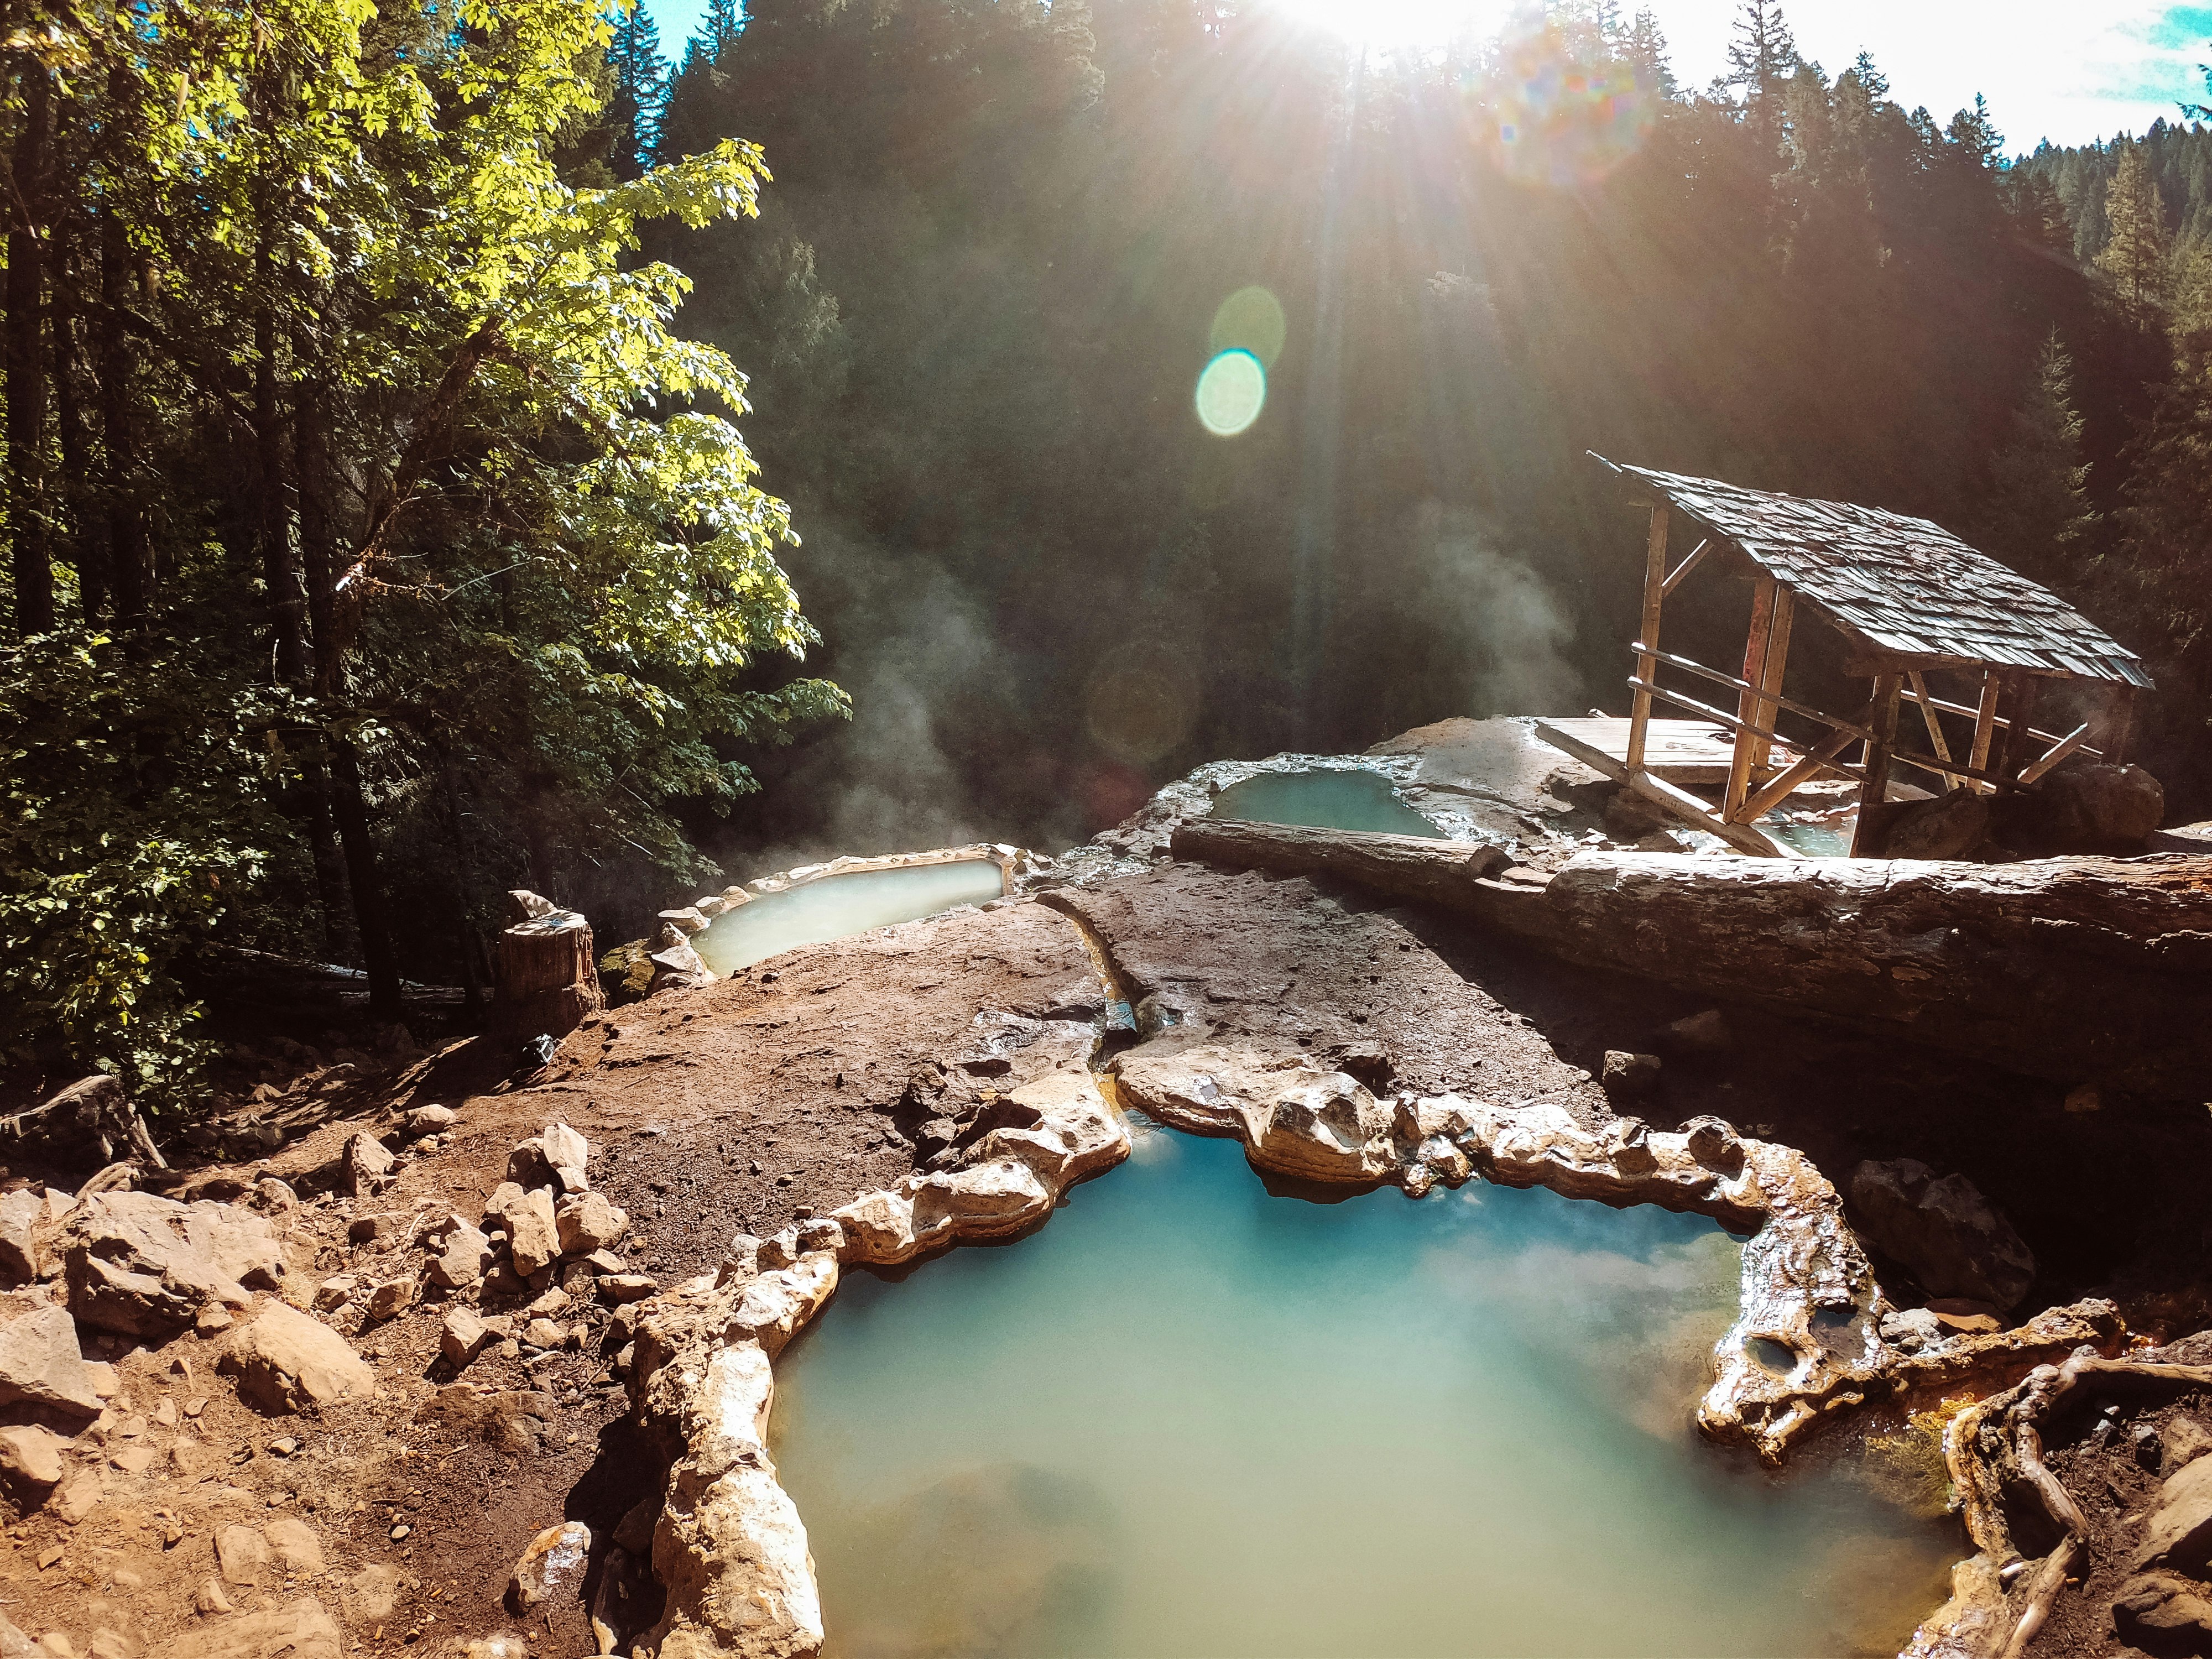 Three deep irregularly shaped teal pools surrounded by light brown earth and rocks overlook a stand of spruce and fir trees. A lens flare cuts through on the right side of the frame, highlighting a small wooden shelter with a wooden shingle roof covering one of the pools.